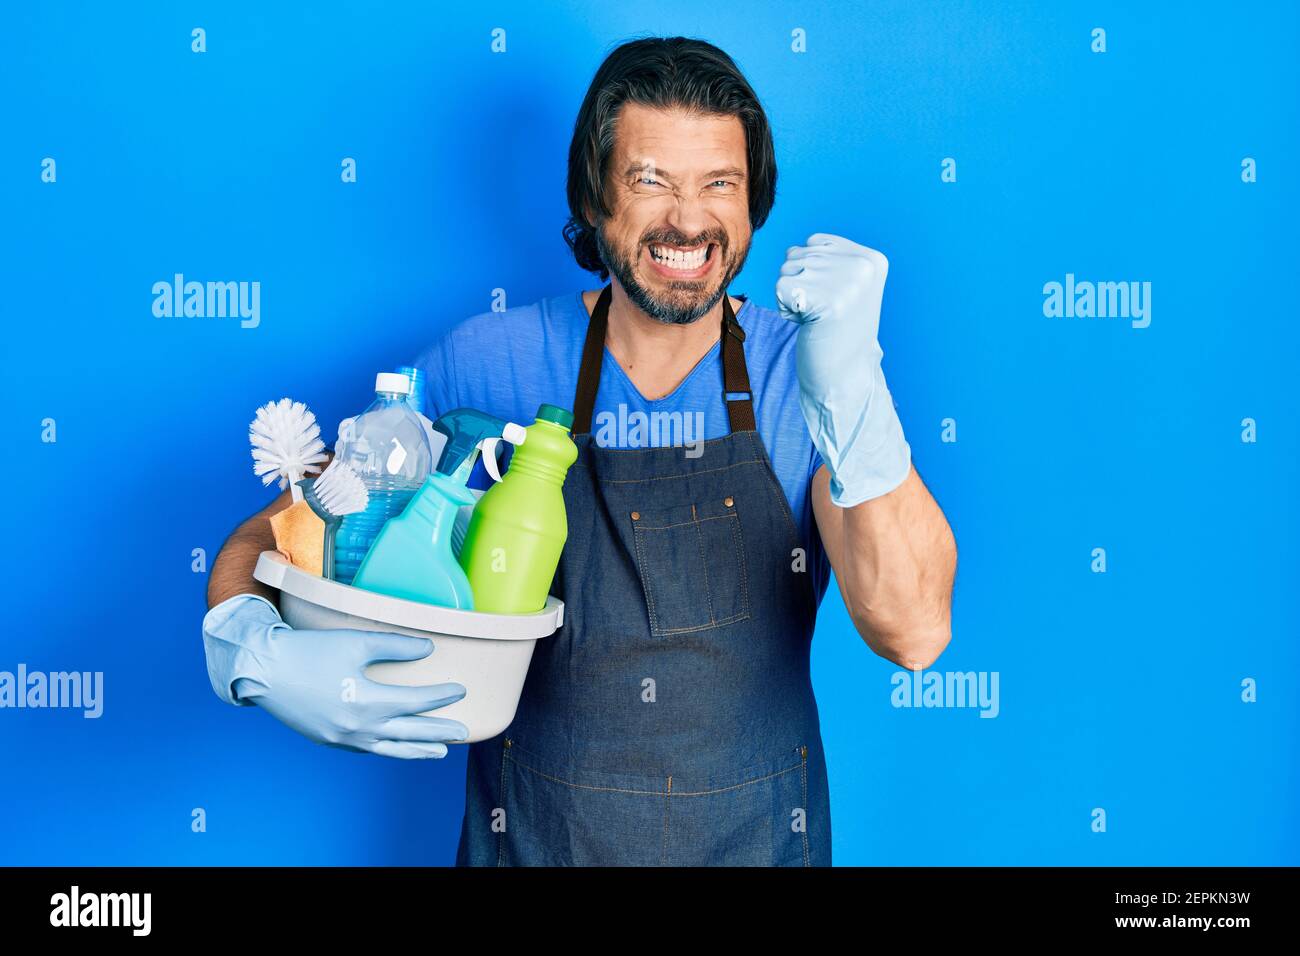 Middle age caucasian man holding cleaning products annoyed and frustrated shouting with anger, yelling crazy with anger and hand raised Stock Photo